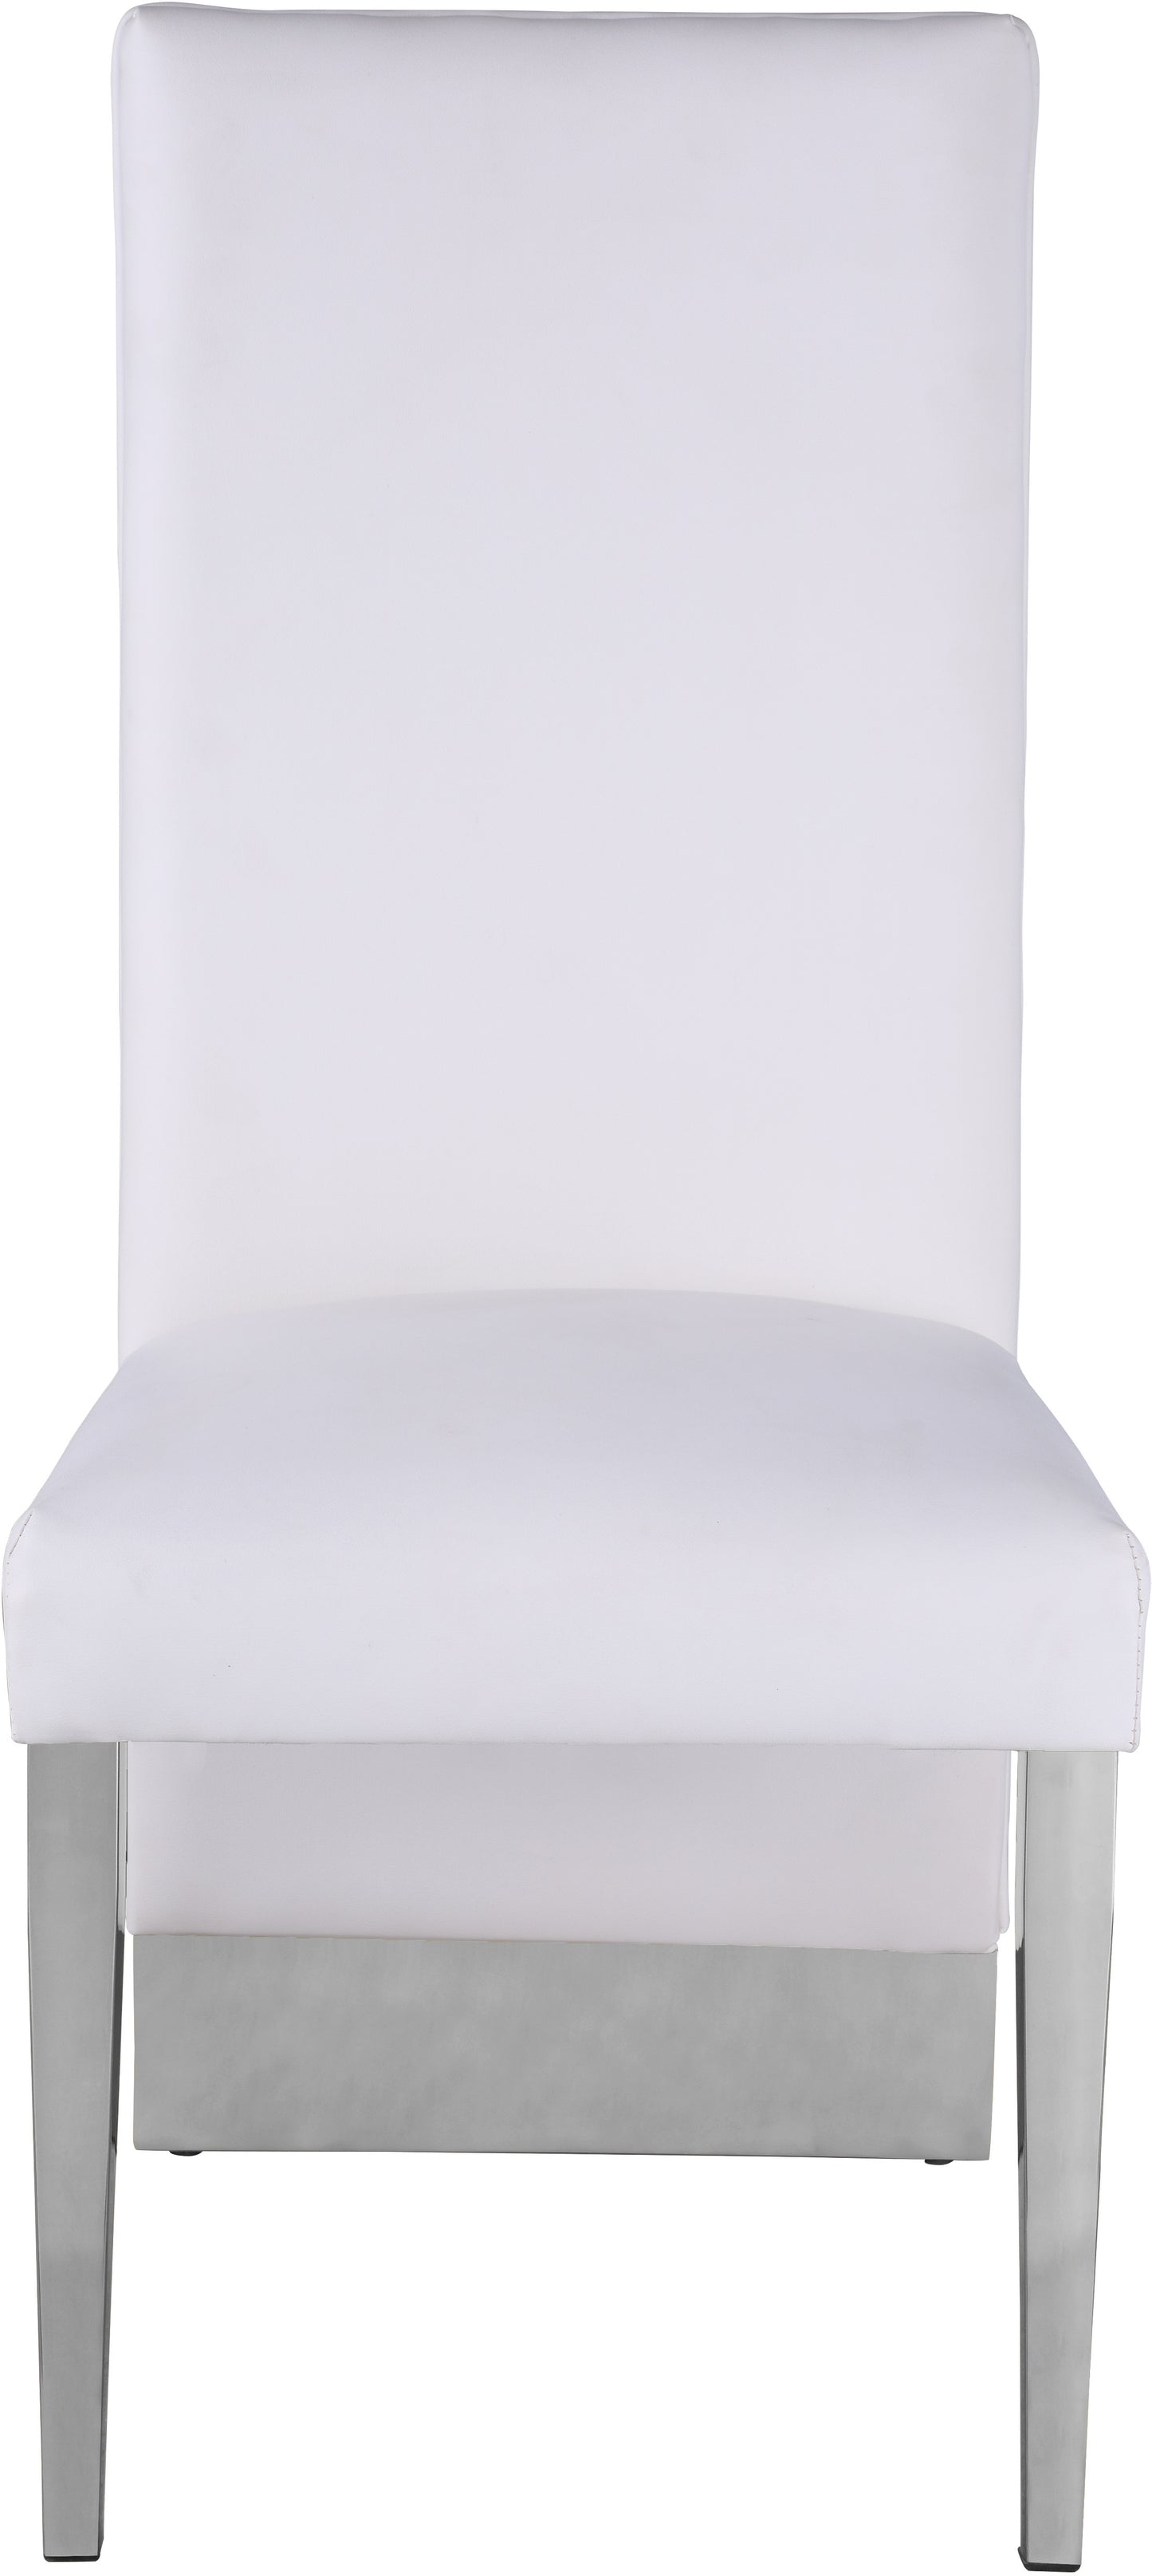 abigail white faux leather dining chair c